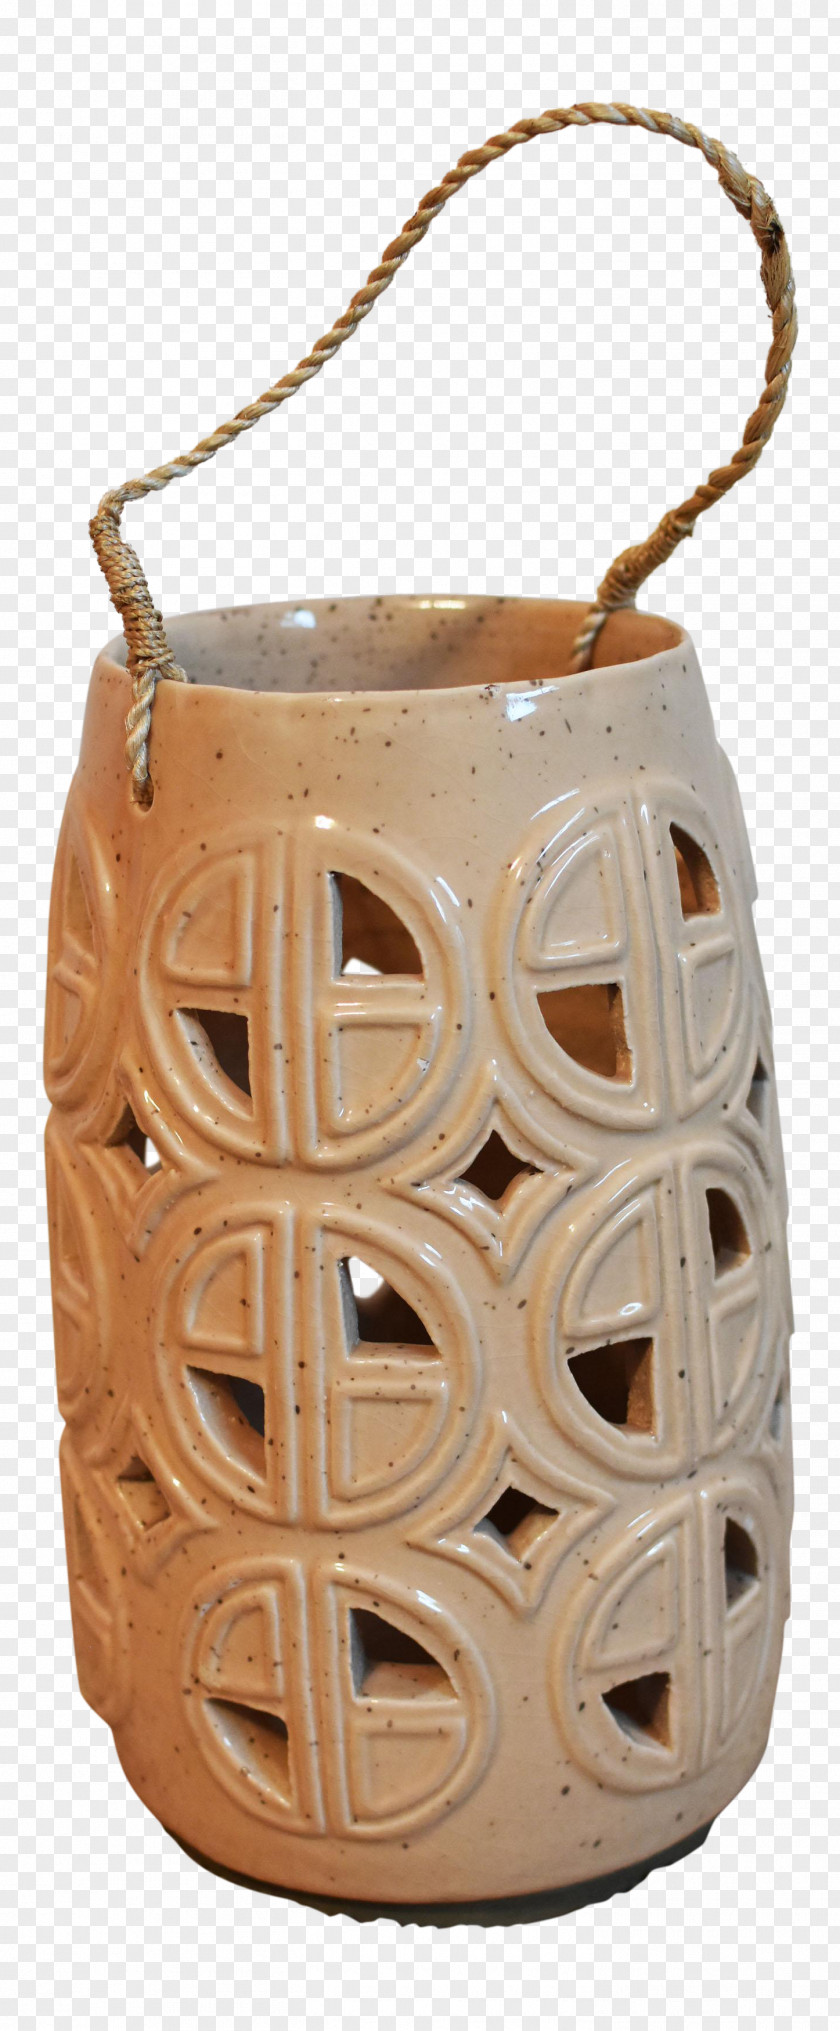 Hand-painted Leaning Tower Of Pisa Earthenware Vase Pottery Chairish PNG